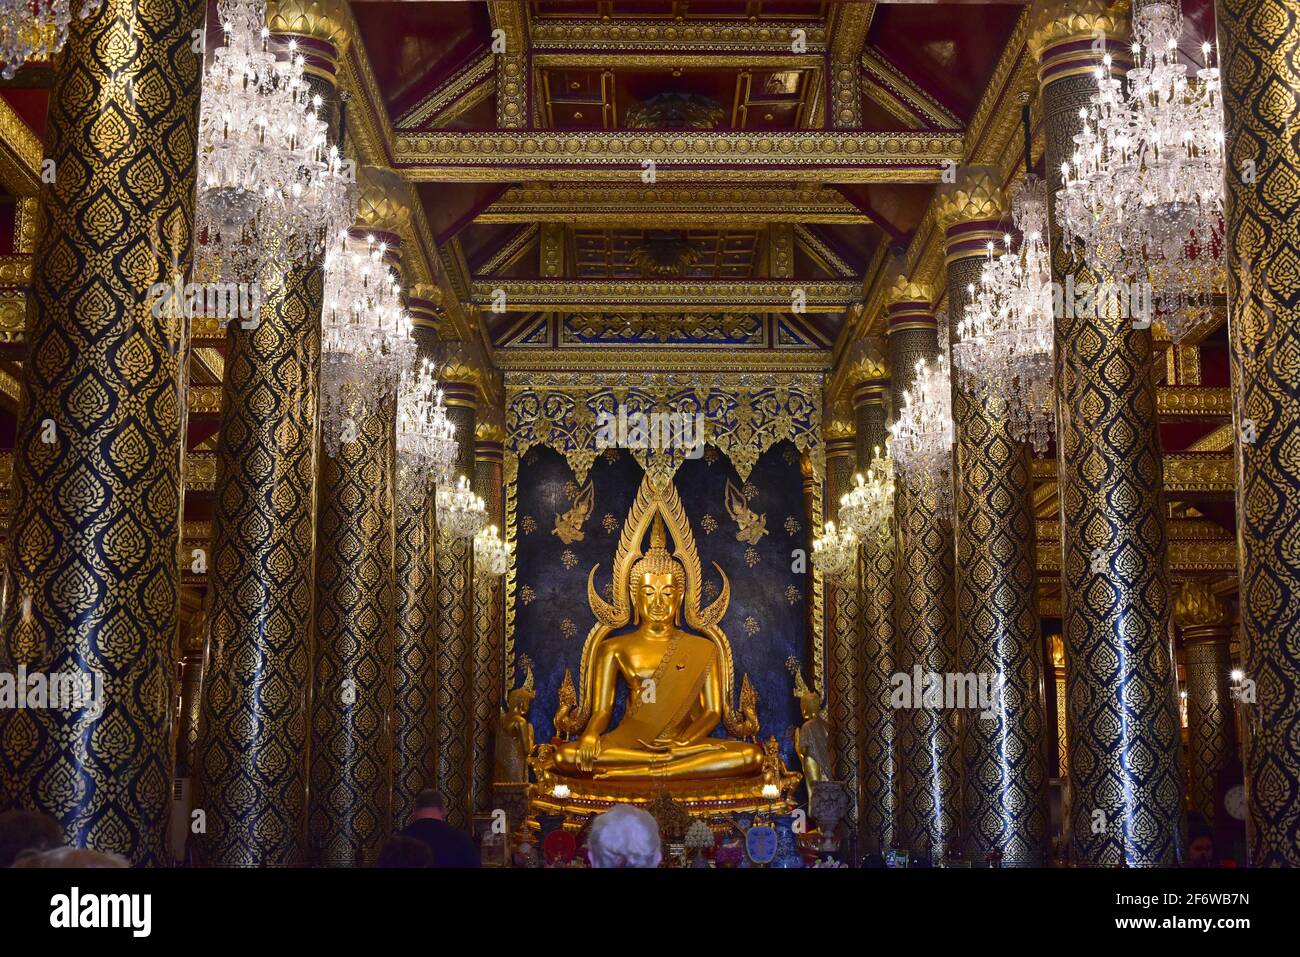 Phitsanulok, Wat Phra Si Rattana Mahathat or Wat Yai is a buddhist temple from 14th century. Thailand. Stock Photo